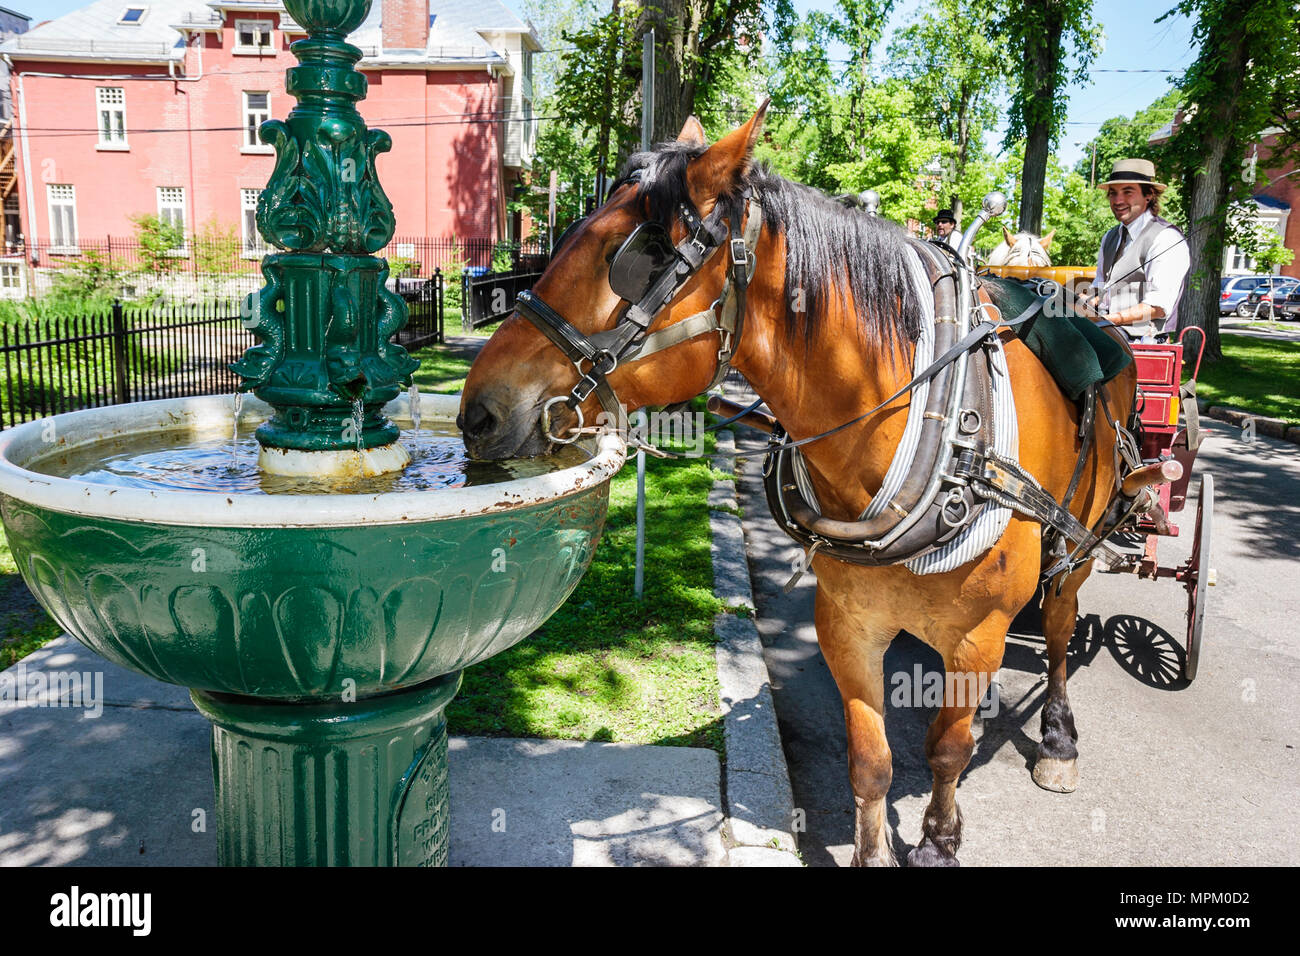 Quebec Canada,Avenue Tache,watering stop,fountain,horse drawn buggy,drink drinks,beverage,working,work,Canada070712058 Stock Photo